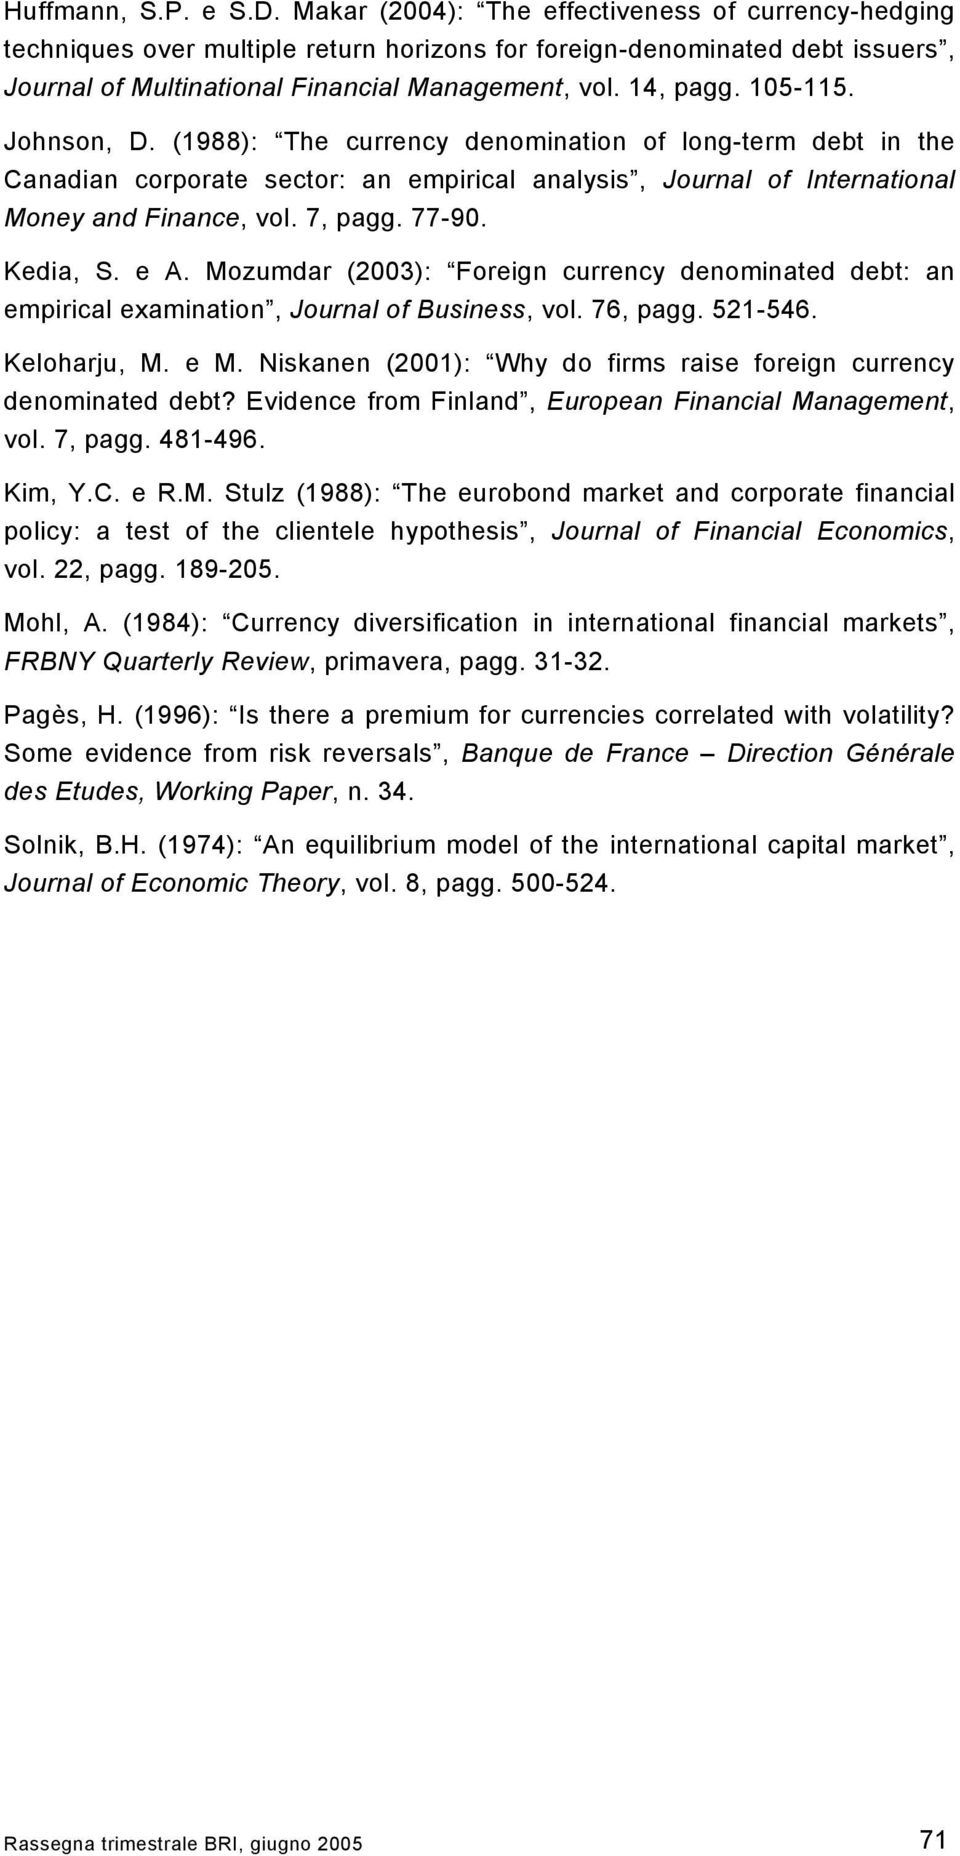 105-115. Johnson, D. (1988): The currency denomination of long-term debt in the Canadian corporate sector: an empirical analysis, Journal of International Money and Finance, vol. 7, pagg. 77-90.